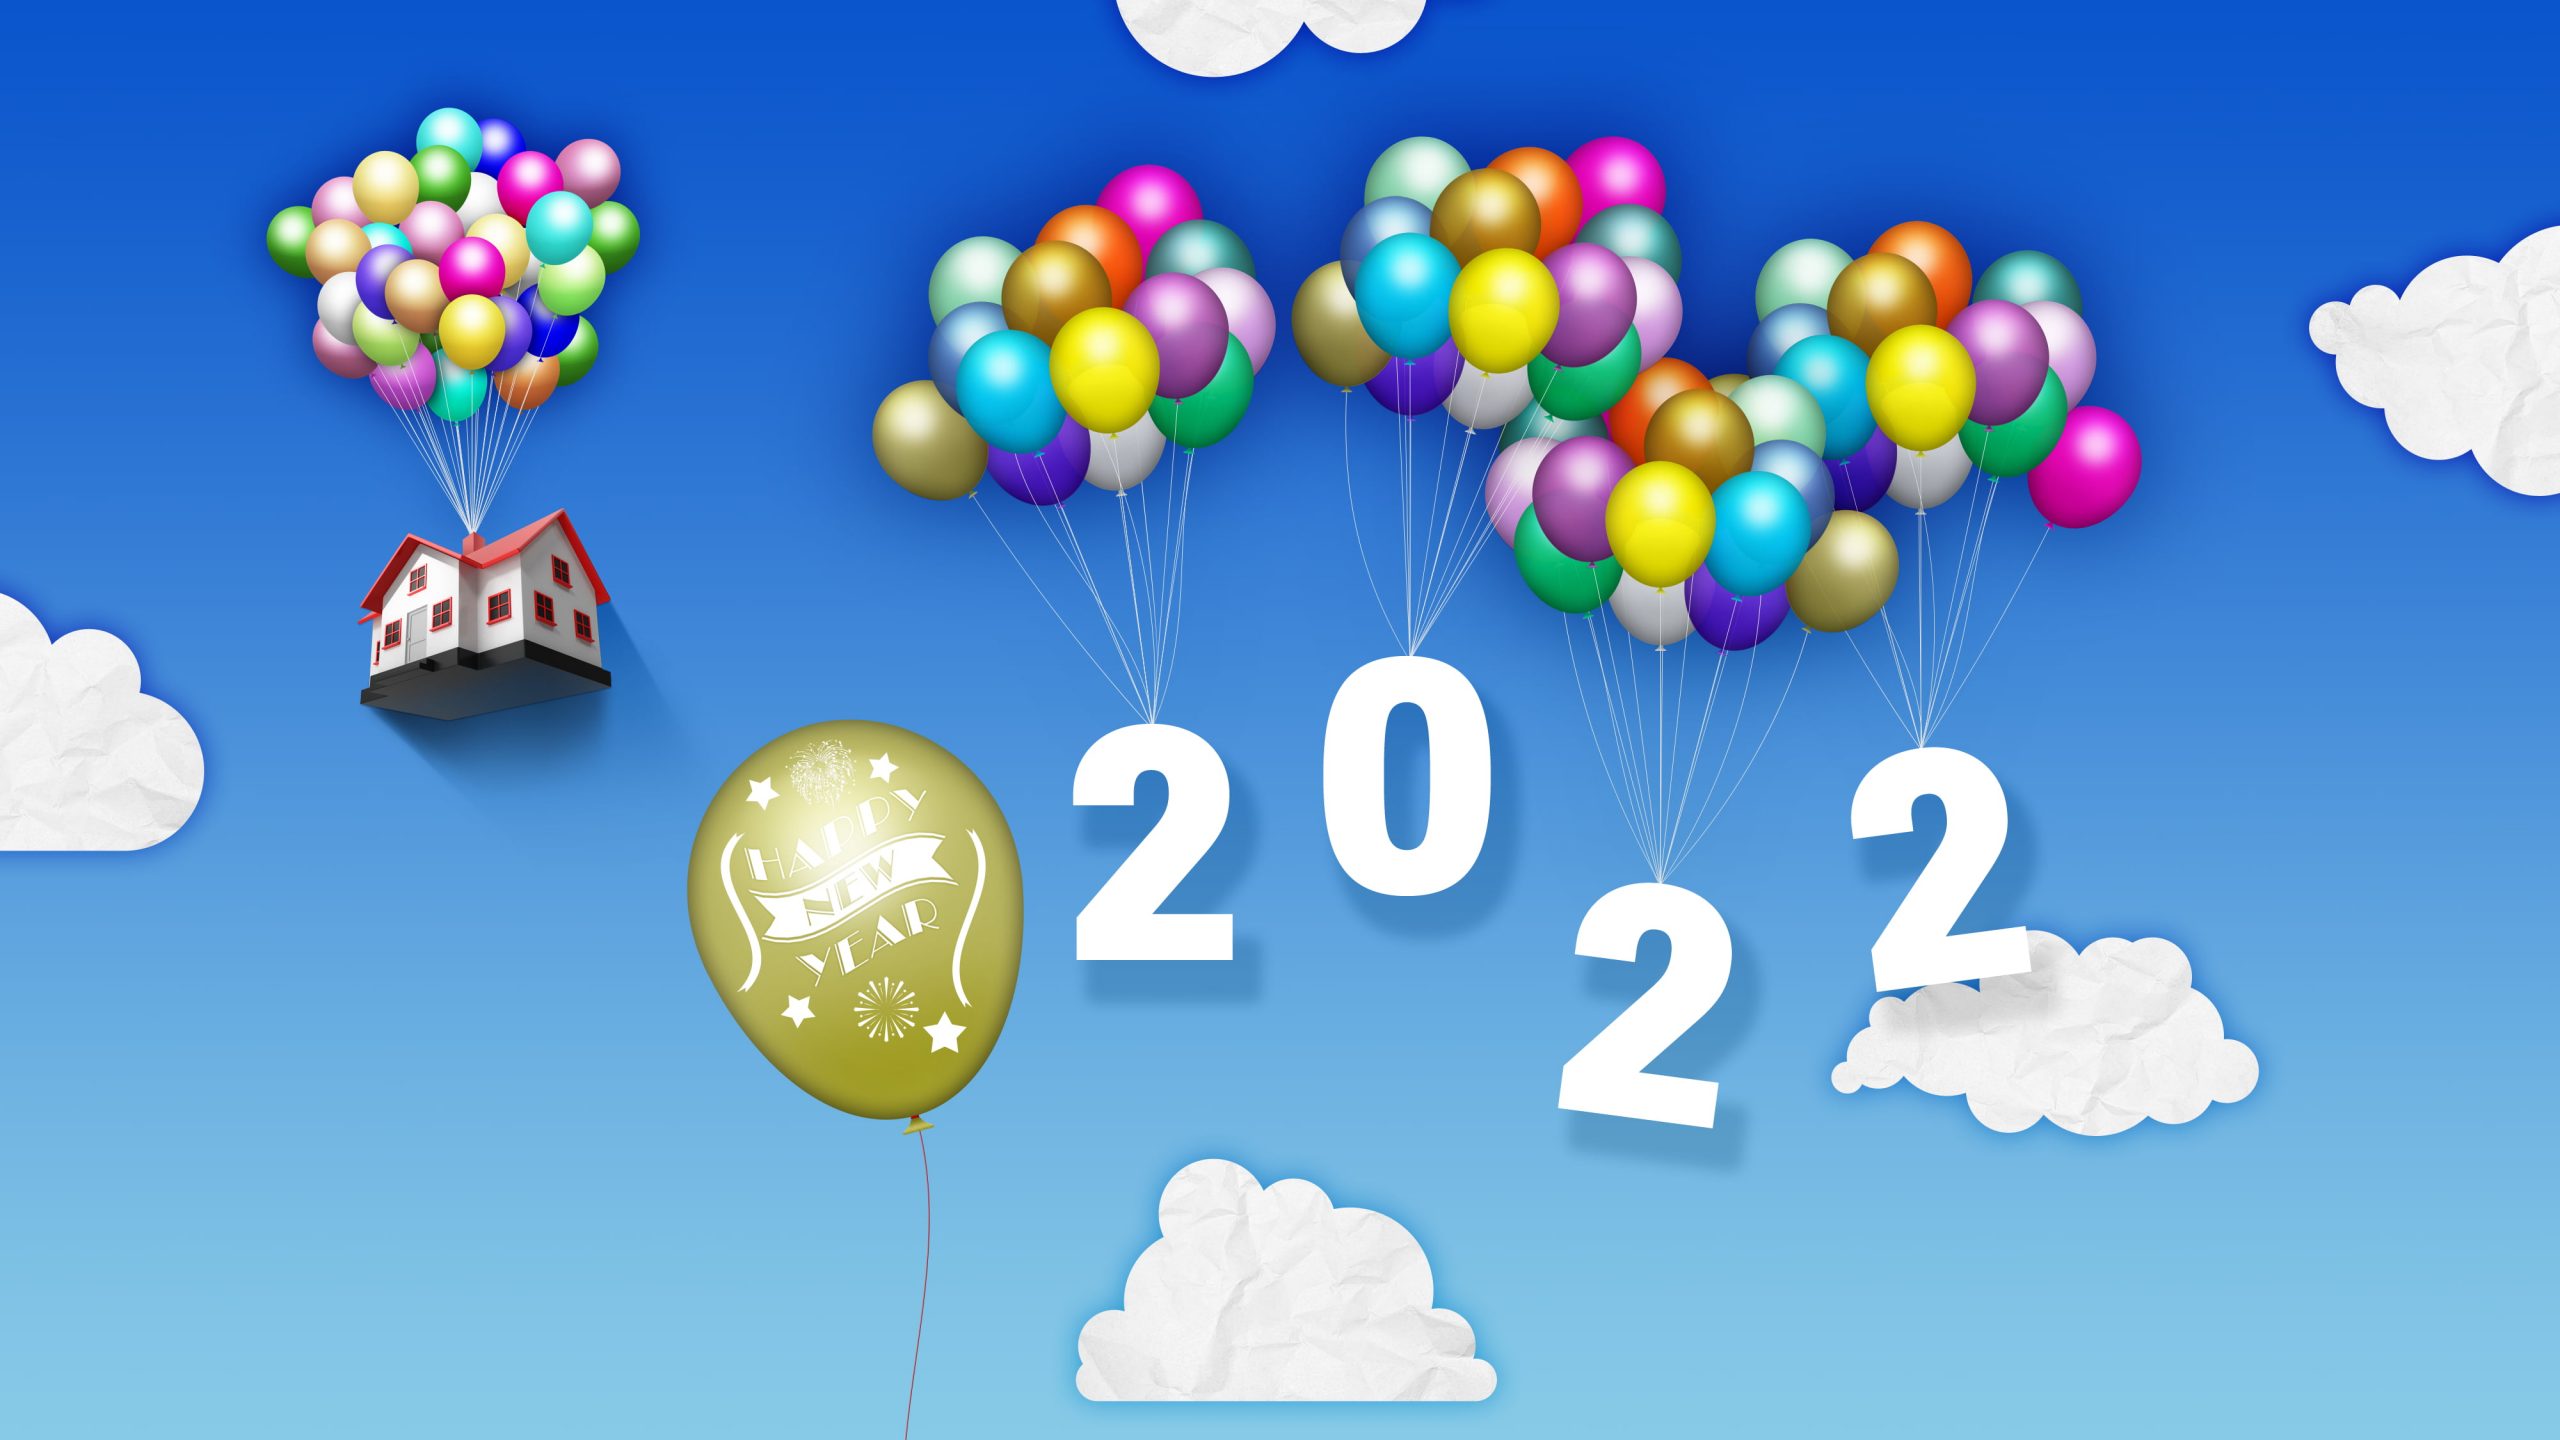 happy new year images download hd